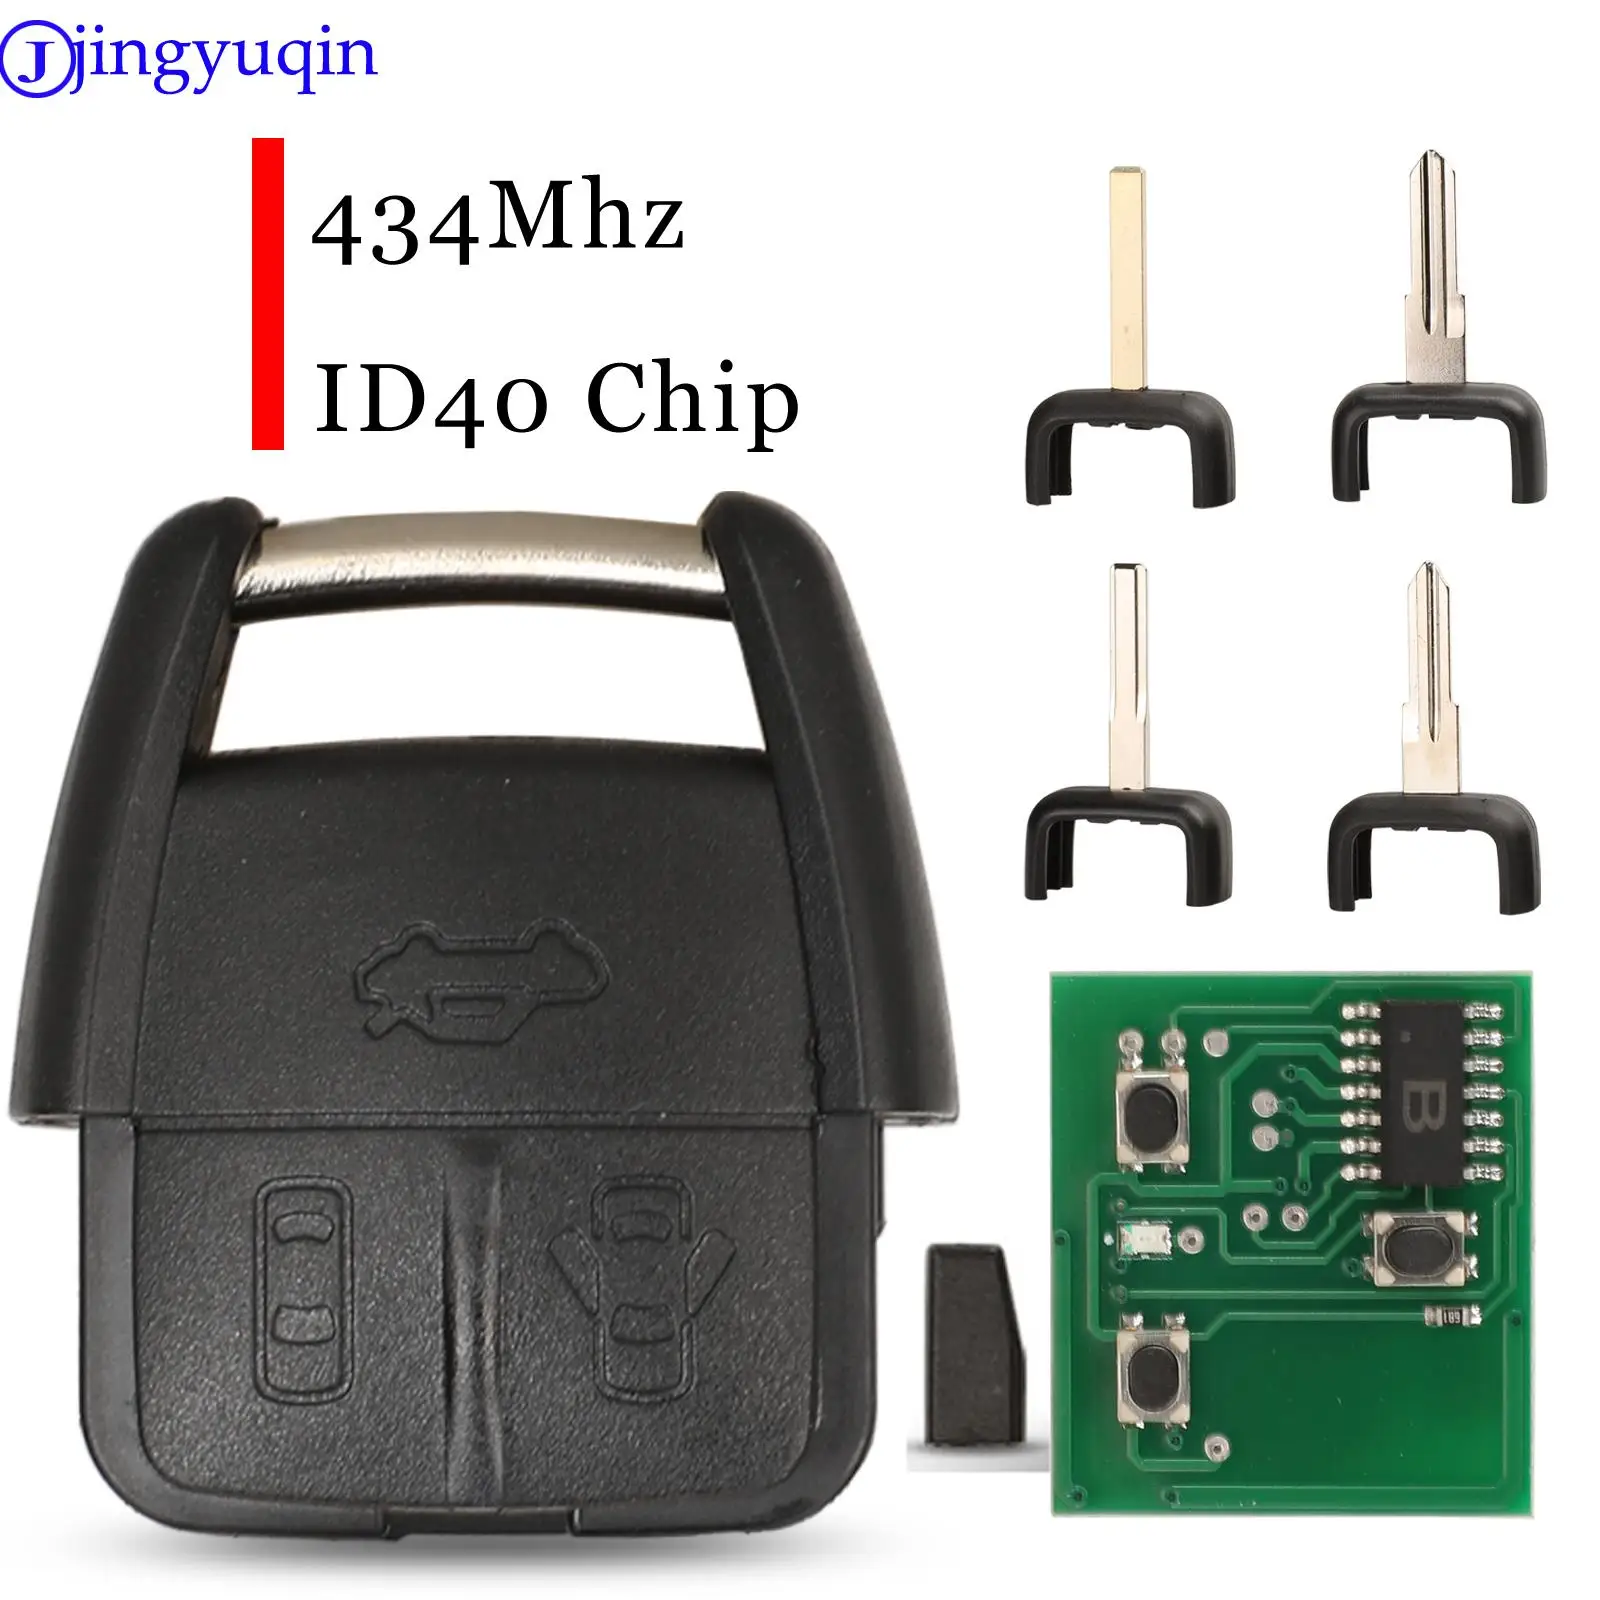 jingyuqin 3 Buttons Car Remote Key 434Mhz ID40 Chip For Opel Chevrolet Brasil Astra Zafira Vectra